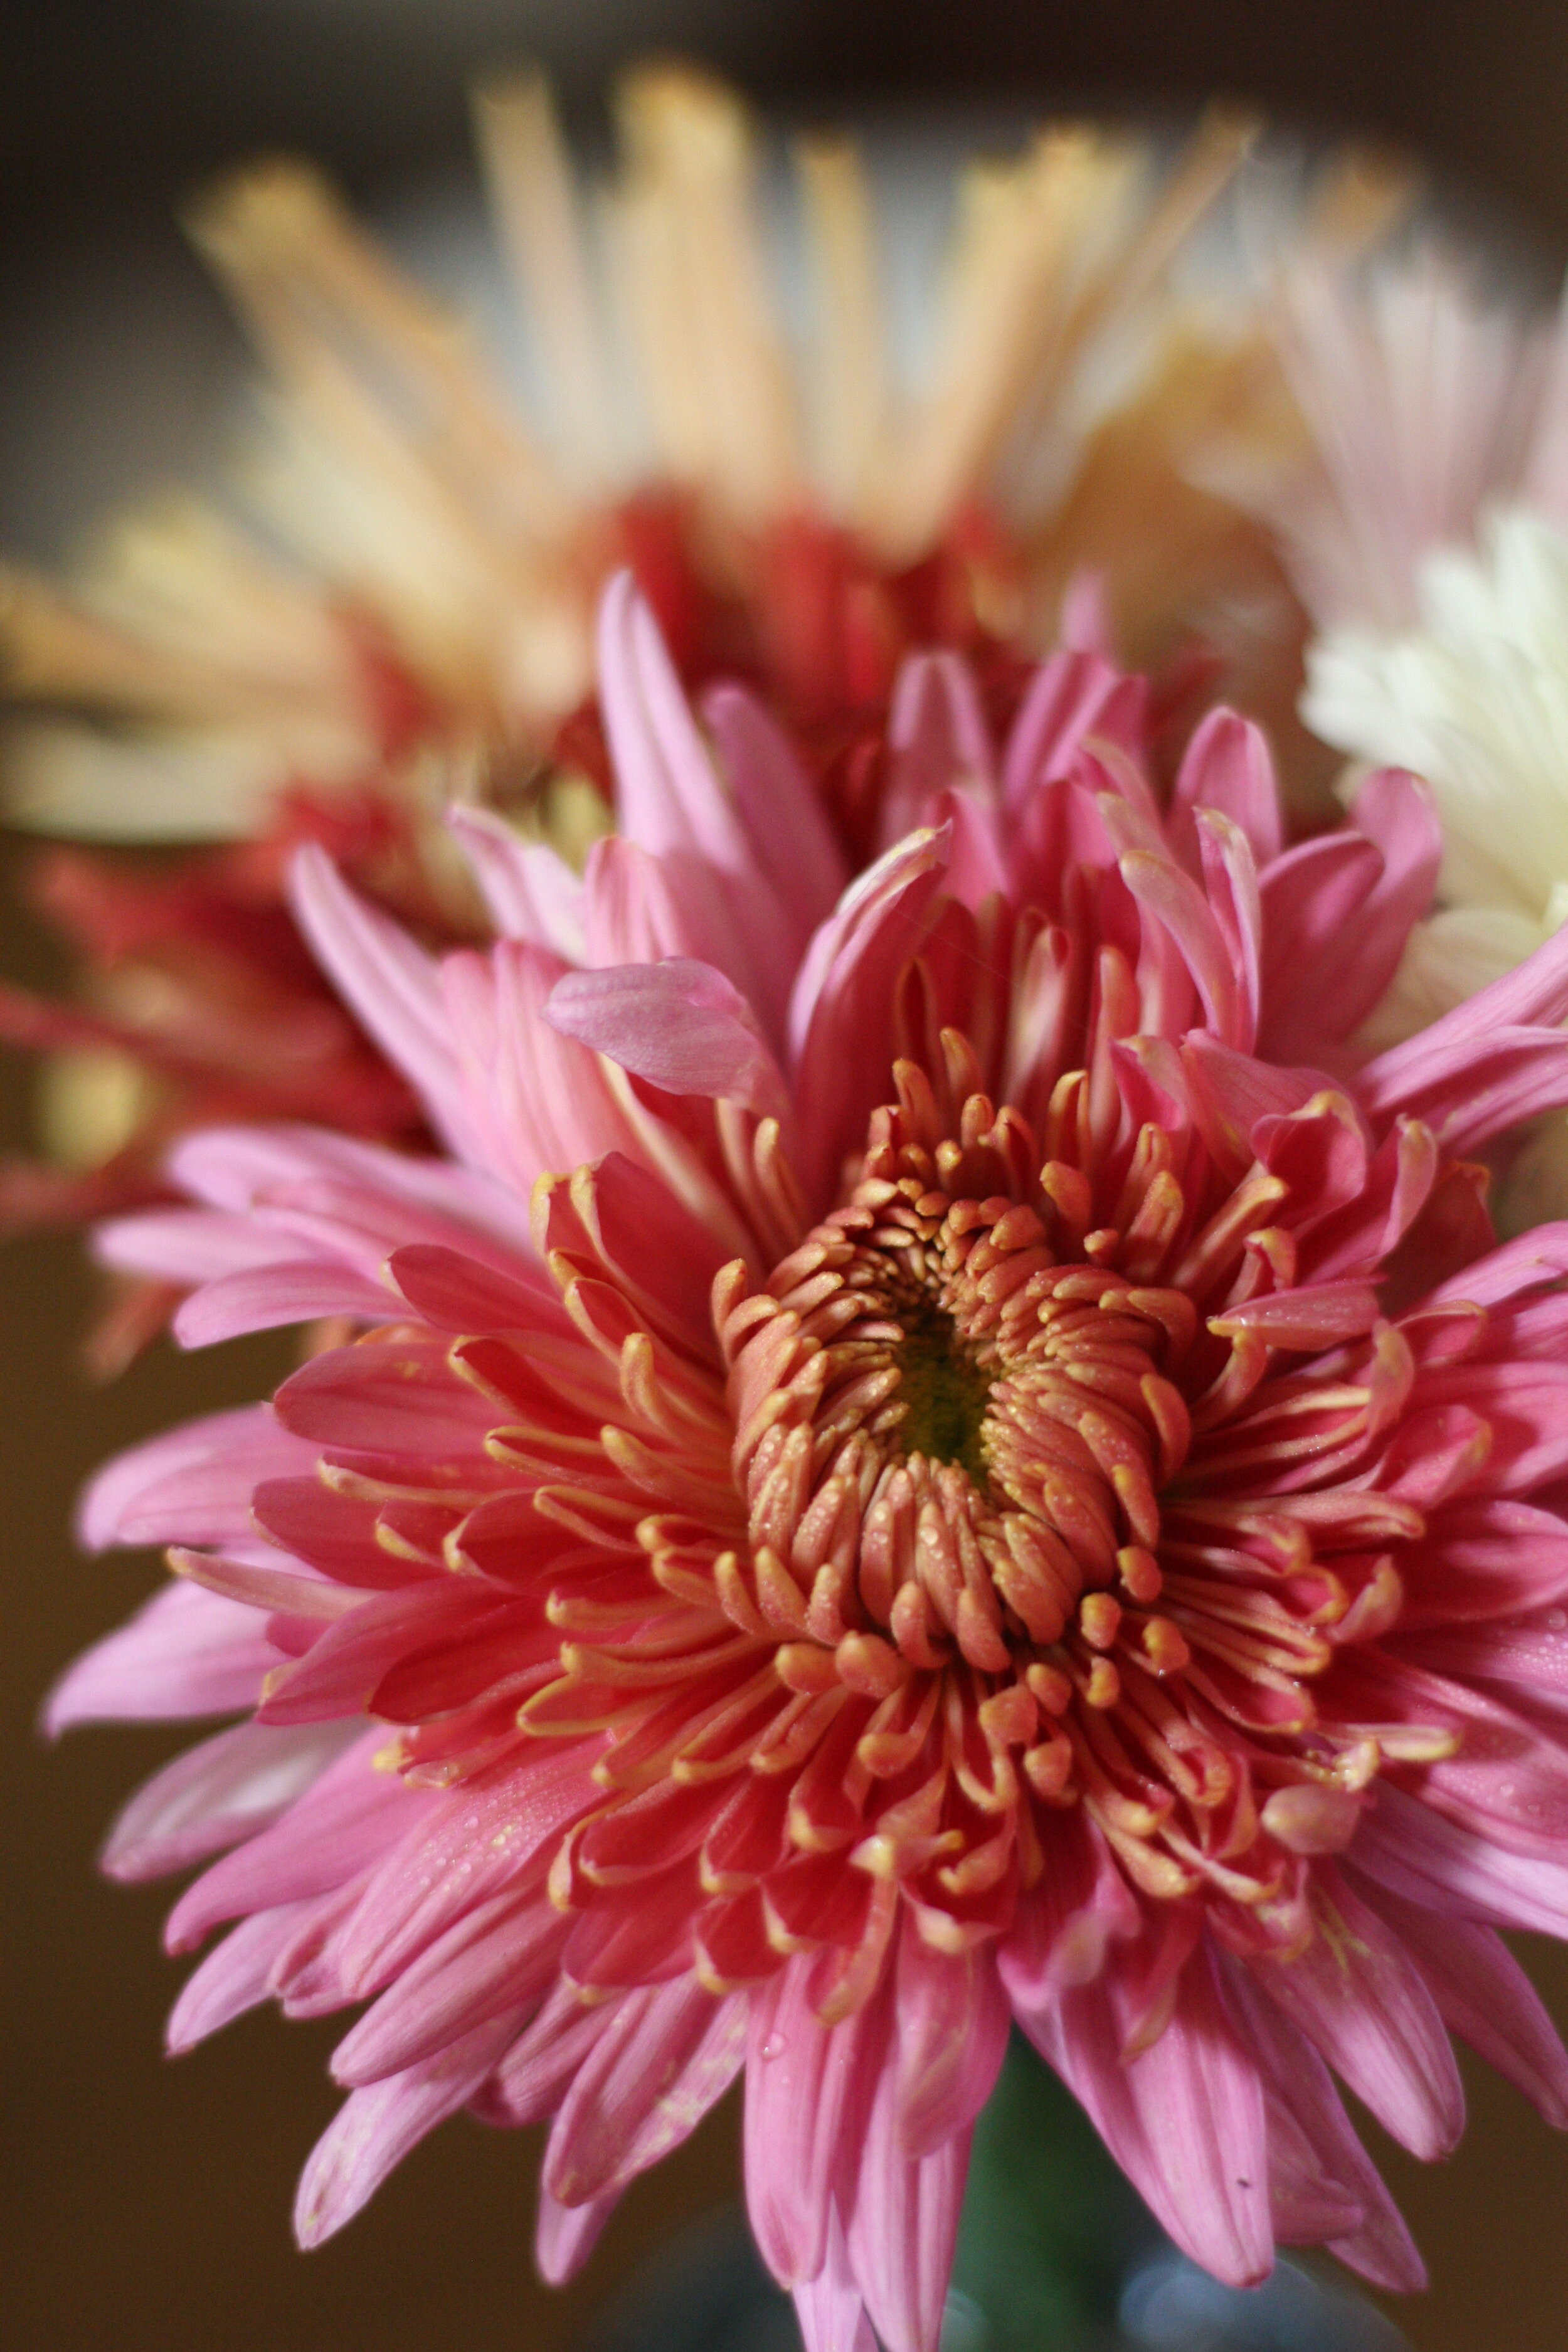 How To Grow Chrysanthemums For The Garden And Floral Design The Kokoro Garden